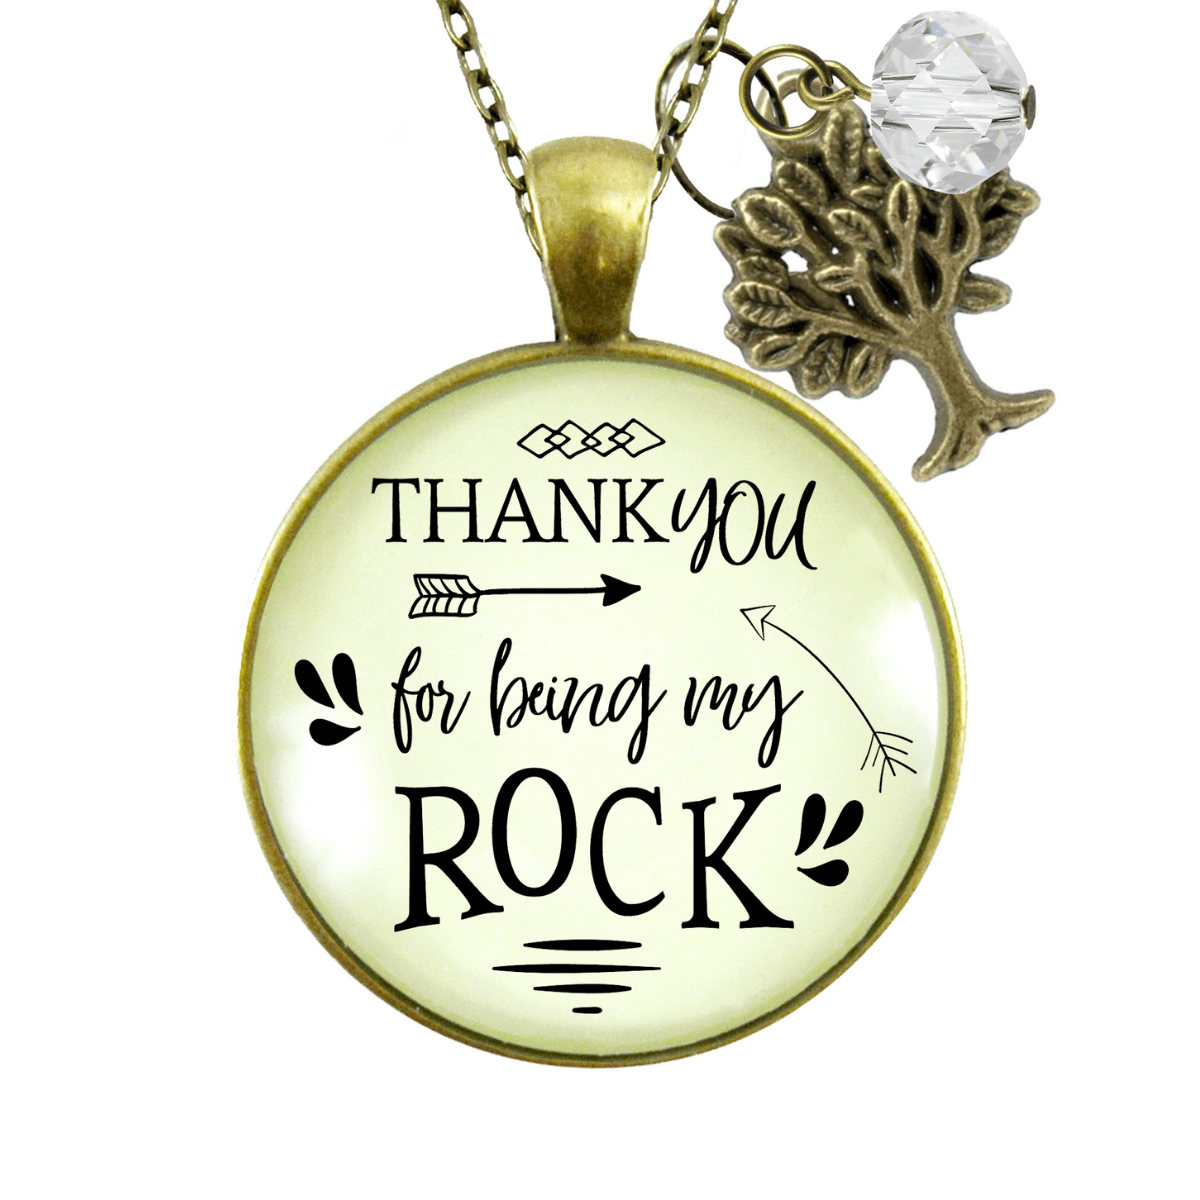 Thank You For Being My Rock Keychain - Gutsy Goodness;Thank You For Being My Rock Keychain - Gutsy Goodness Handmade Jewelry Gifts